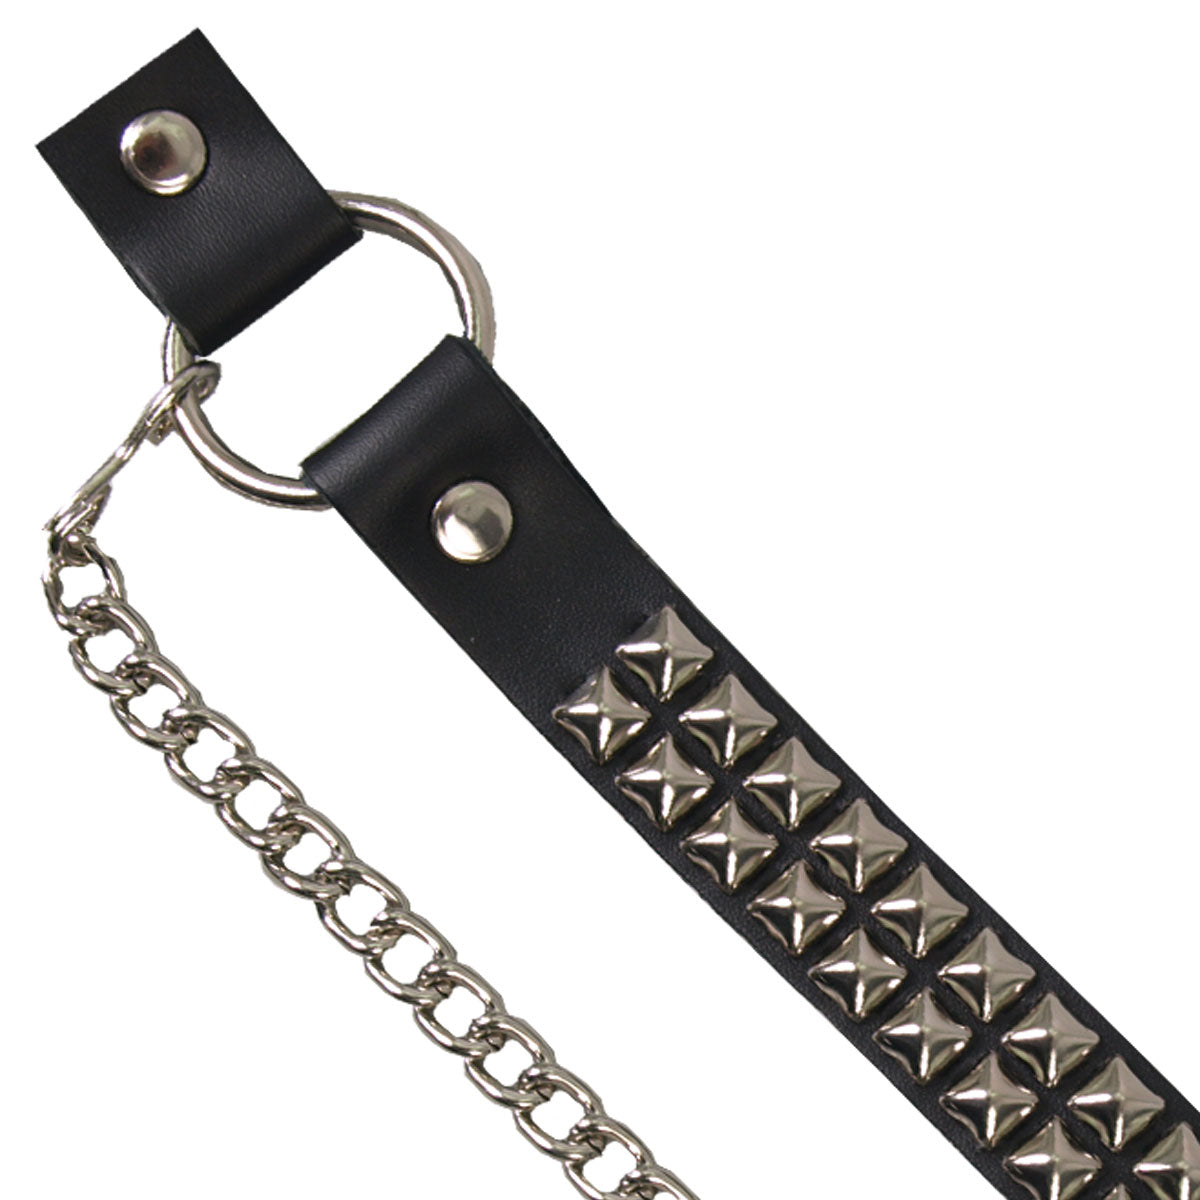 Hot Leathers BNL1012 Small Pyramid Stud Boot Chain